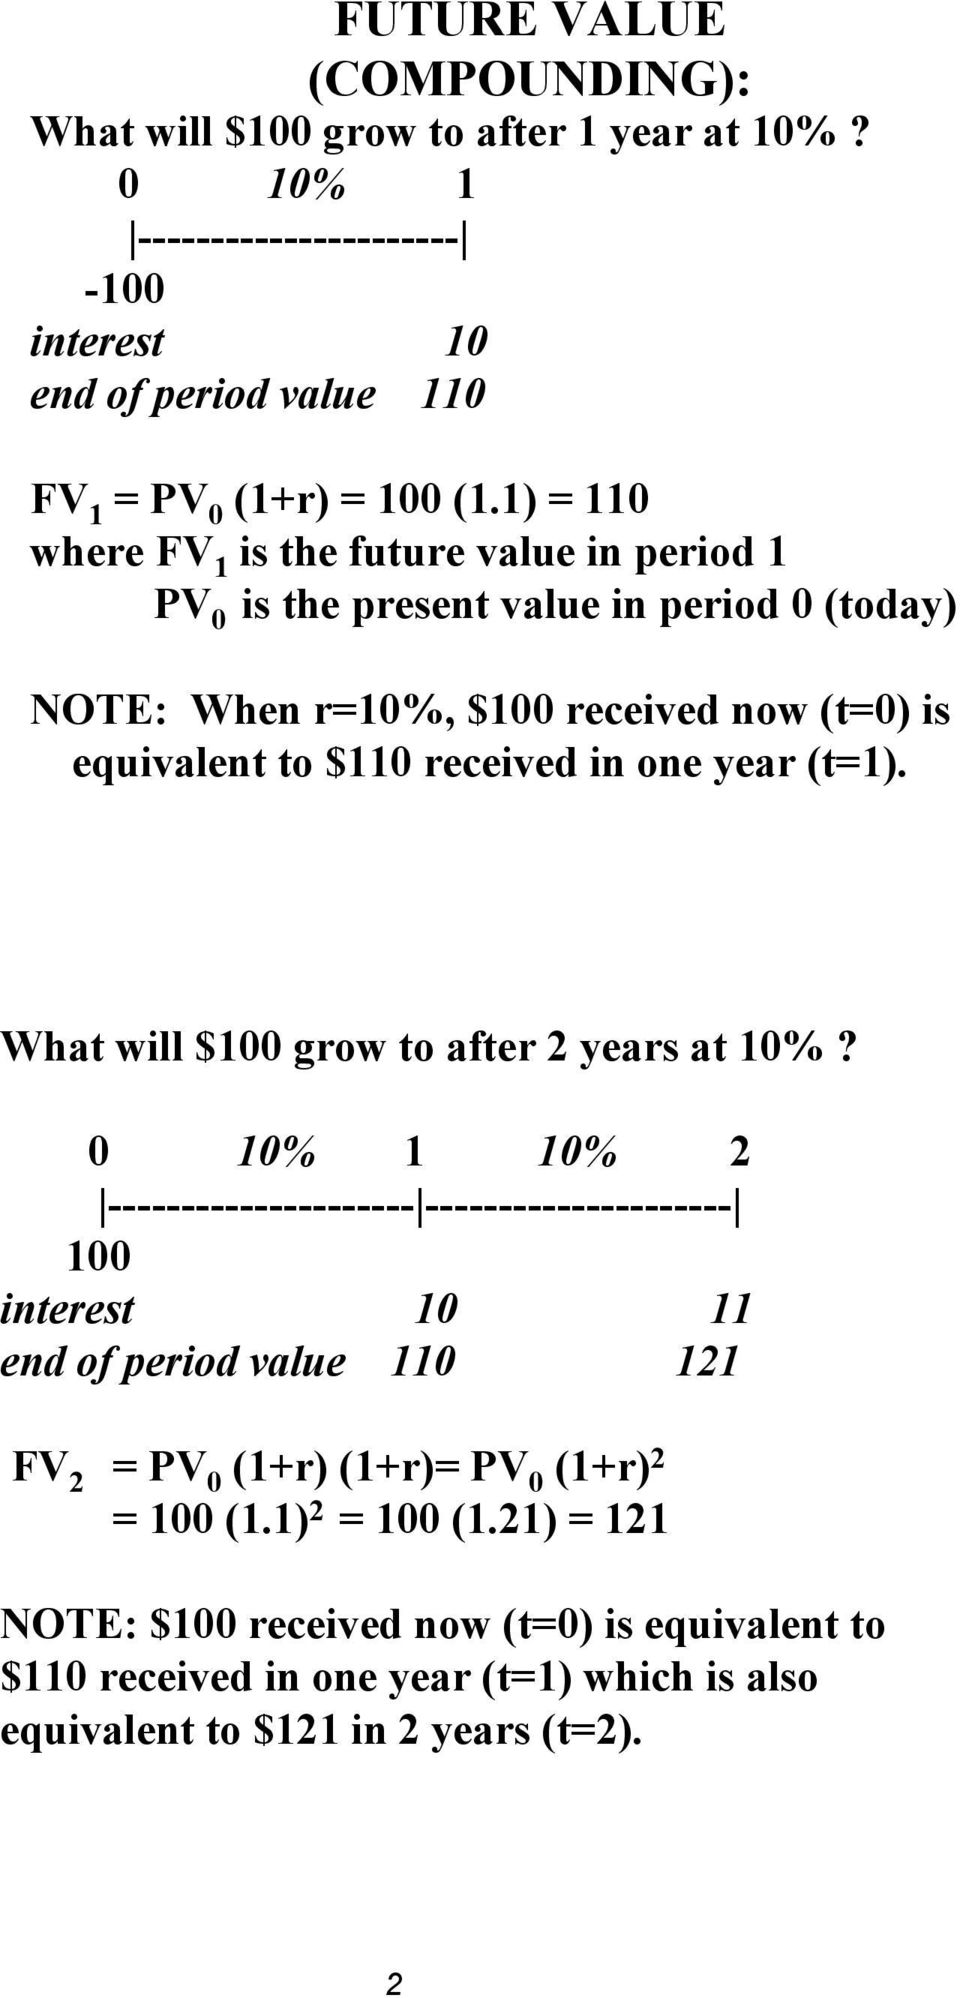 year (t=1). What will $100 grow to after 2 years at 10%?